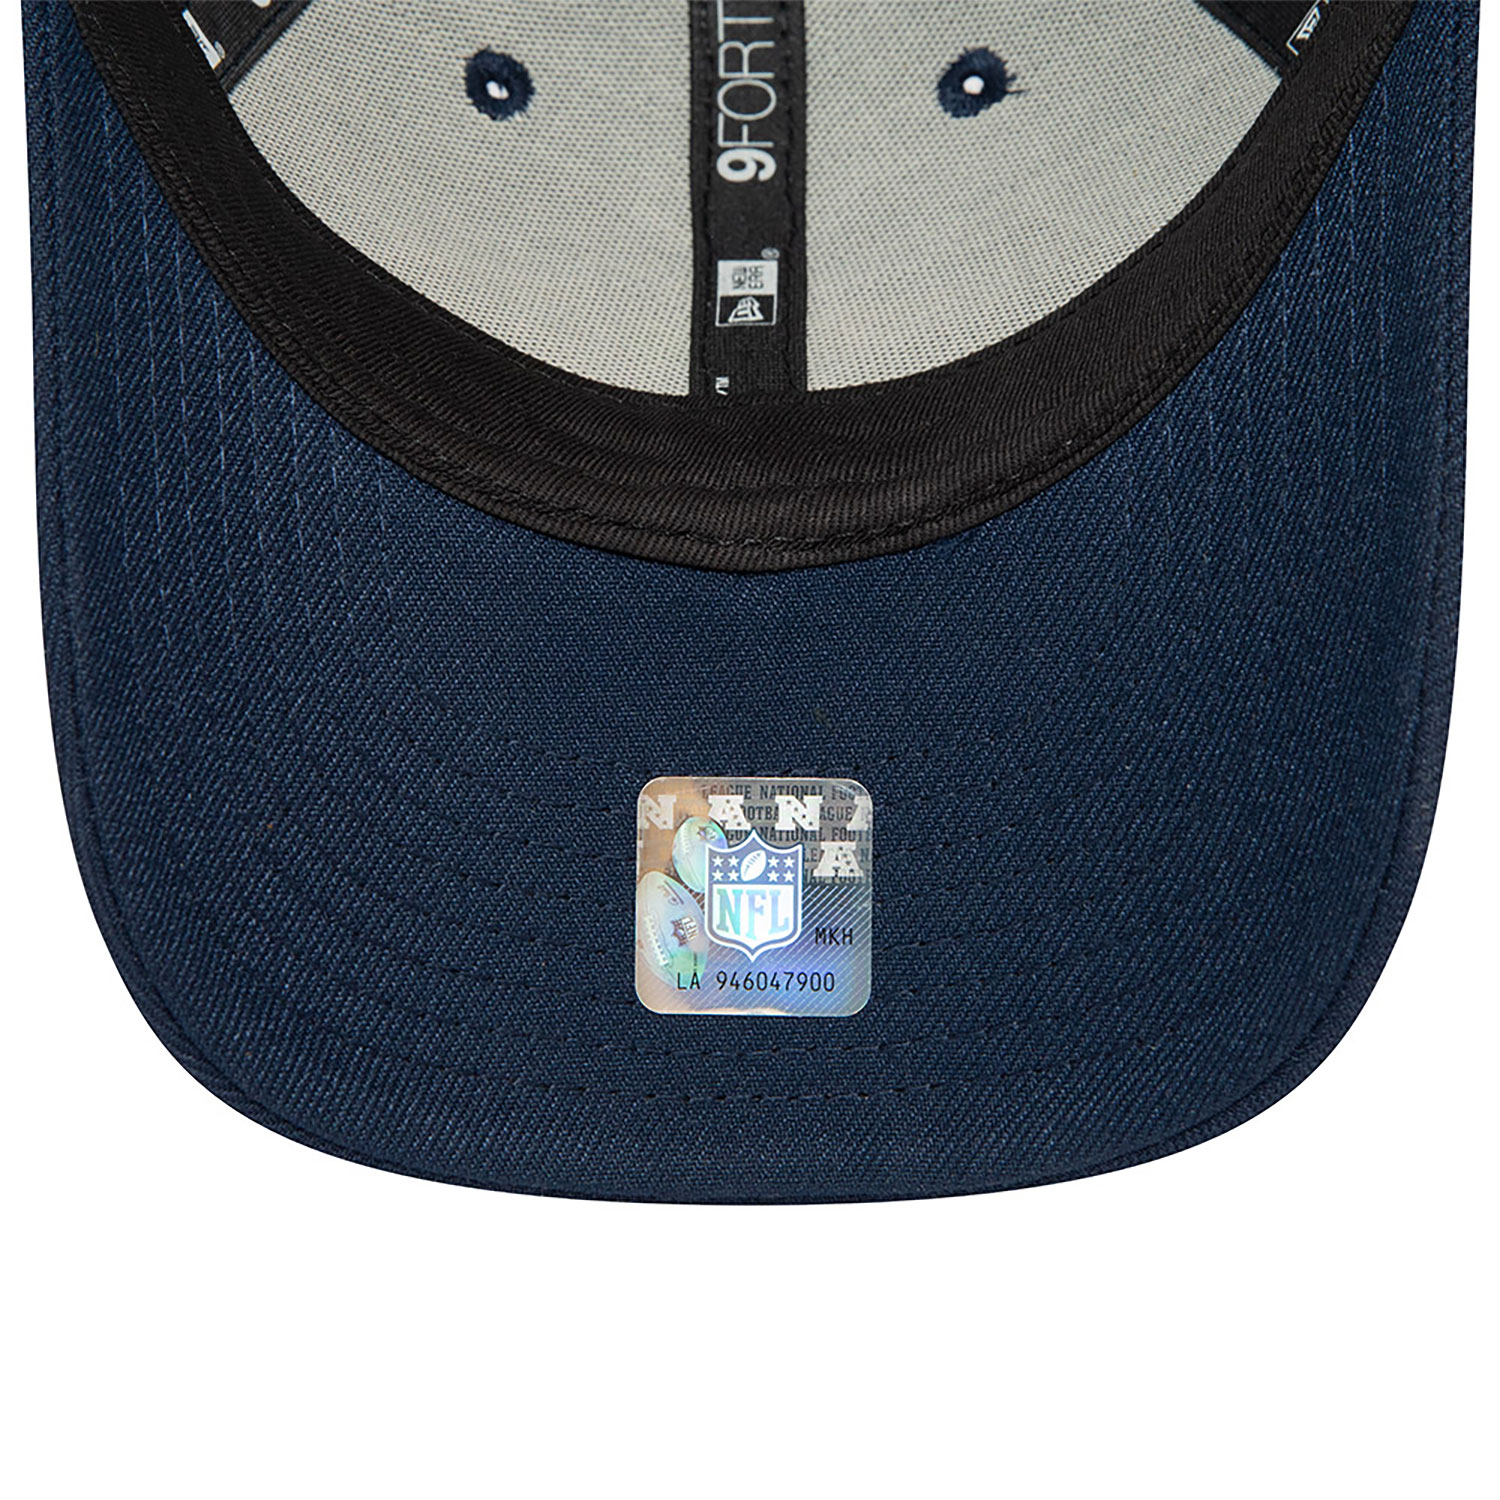 Seattle Seahawks Youth The League Dark Blue 9FORTY Adjustable Cap